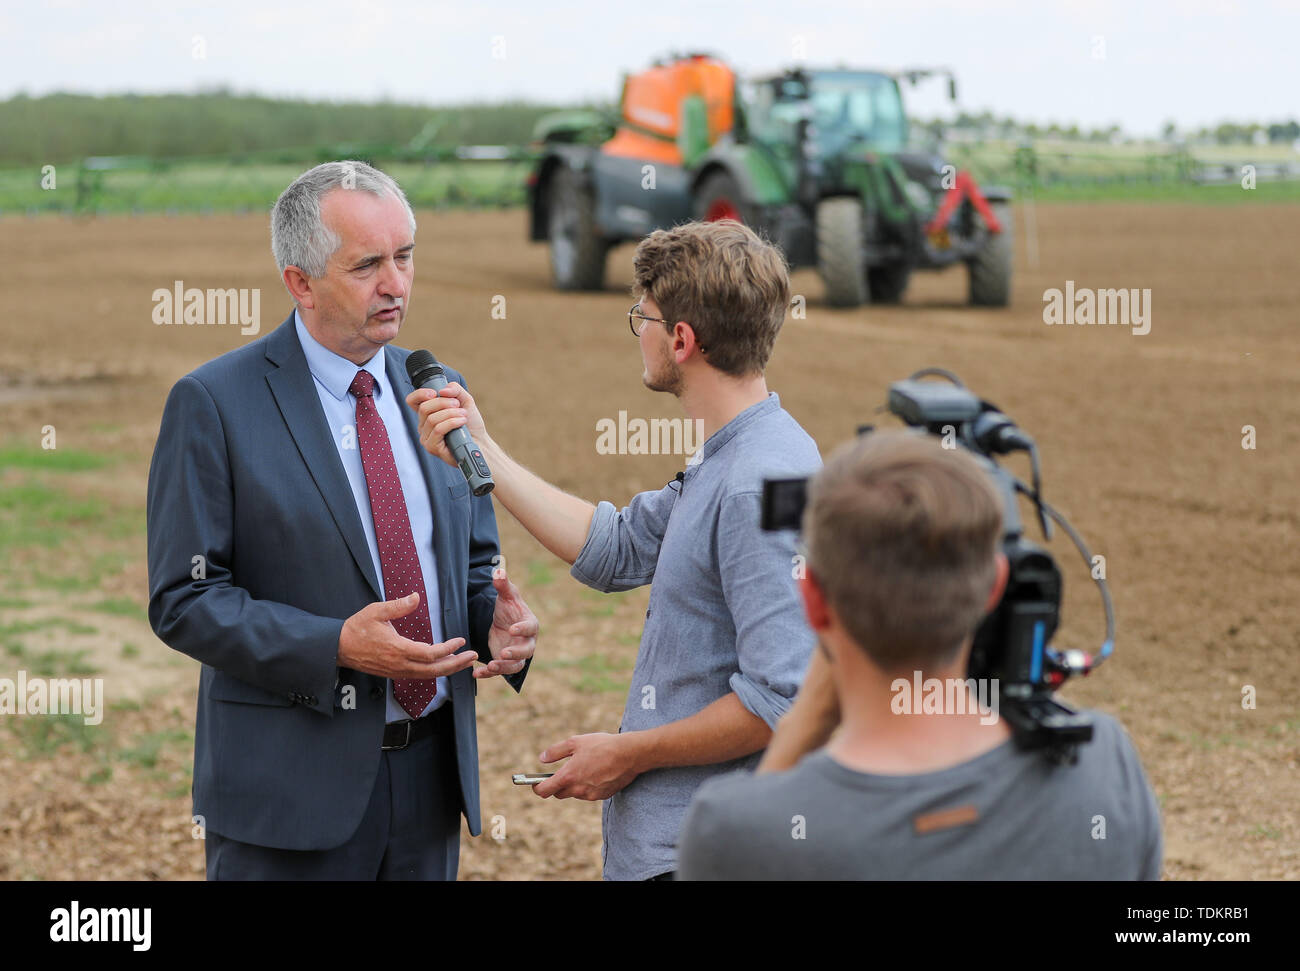 Arzberg, Germany. 17th June, 2019. Thomas Schmidt (l), Minister of  Agriculture of Saxony, speaks to journalists at the edge of the opening of  a digital test field with 5G supply. On the